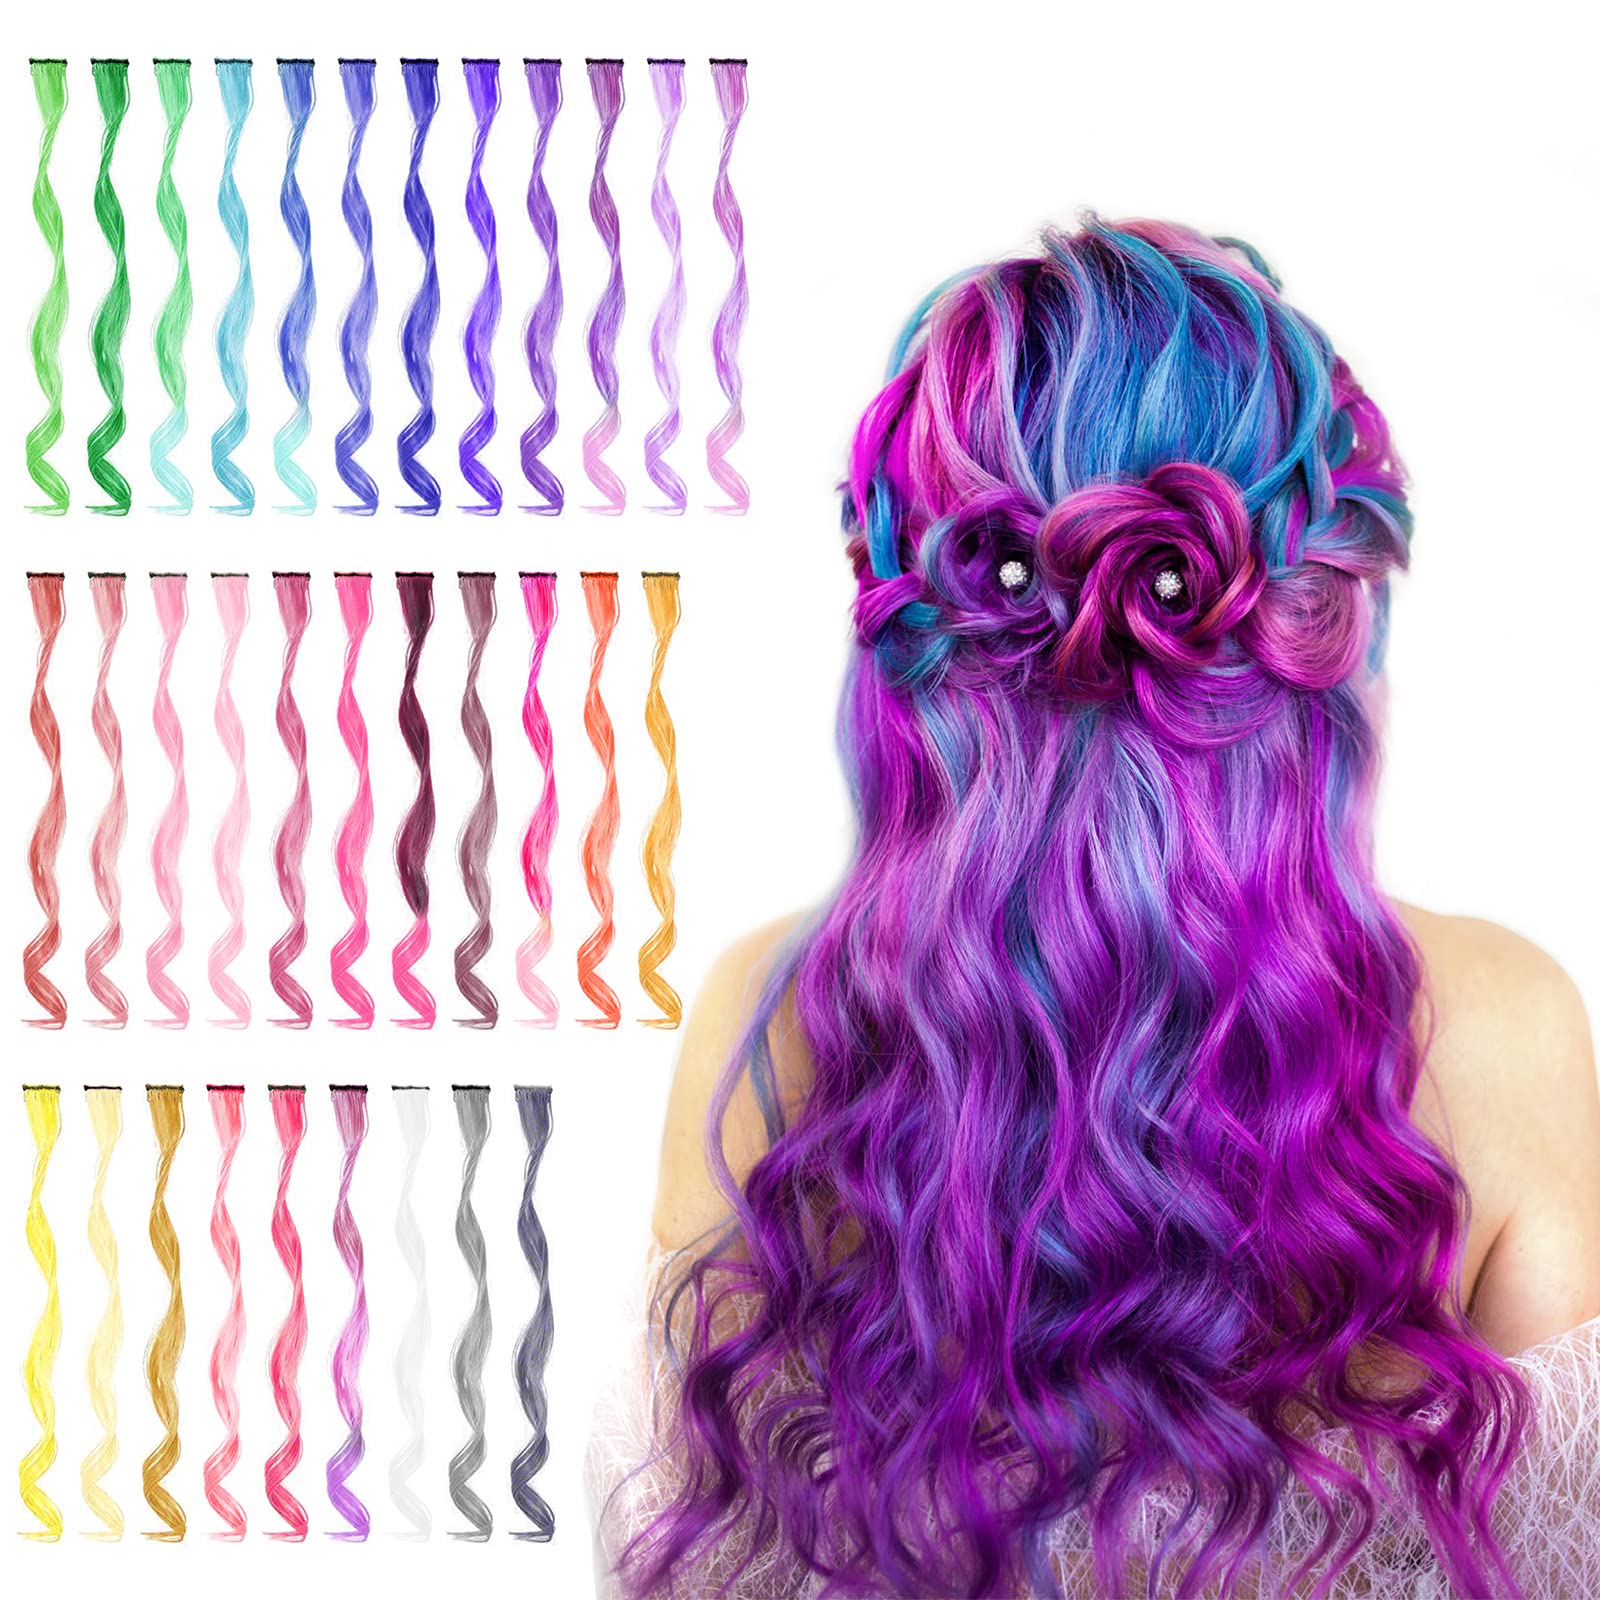 How to Apply Colored Clip-in Hair Extensions